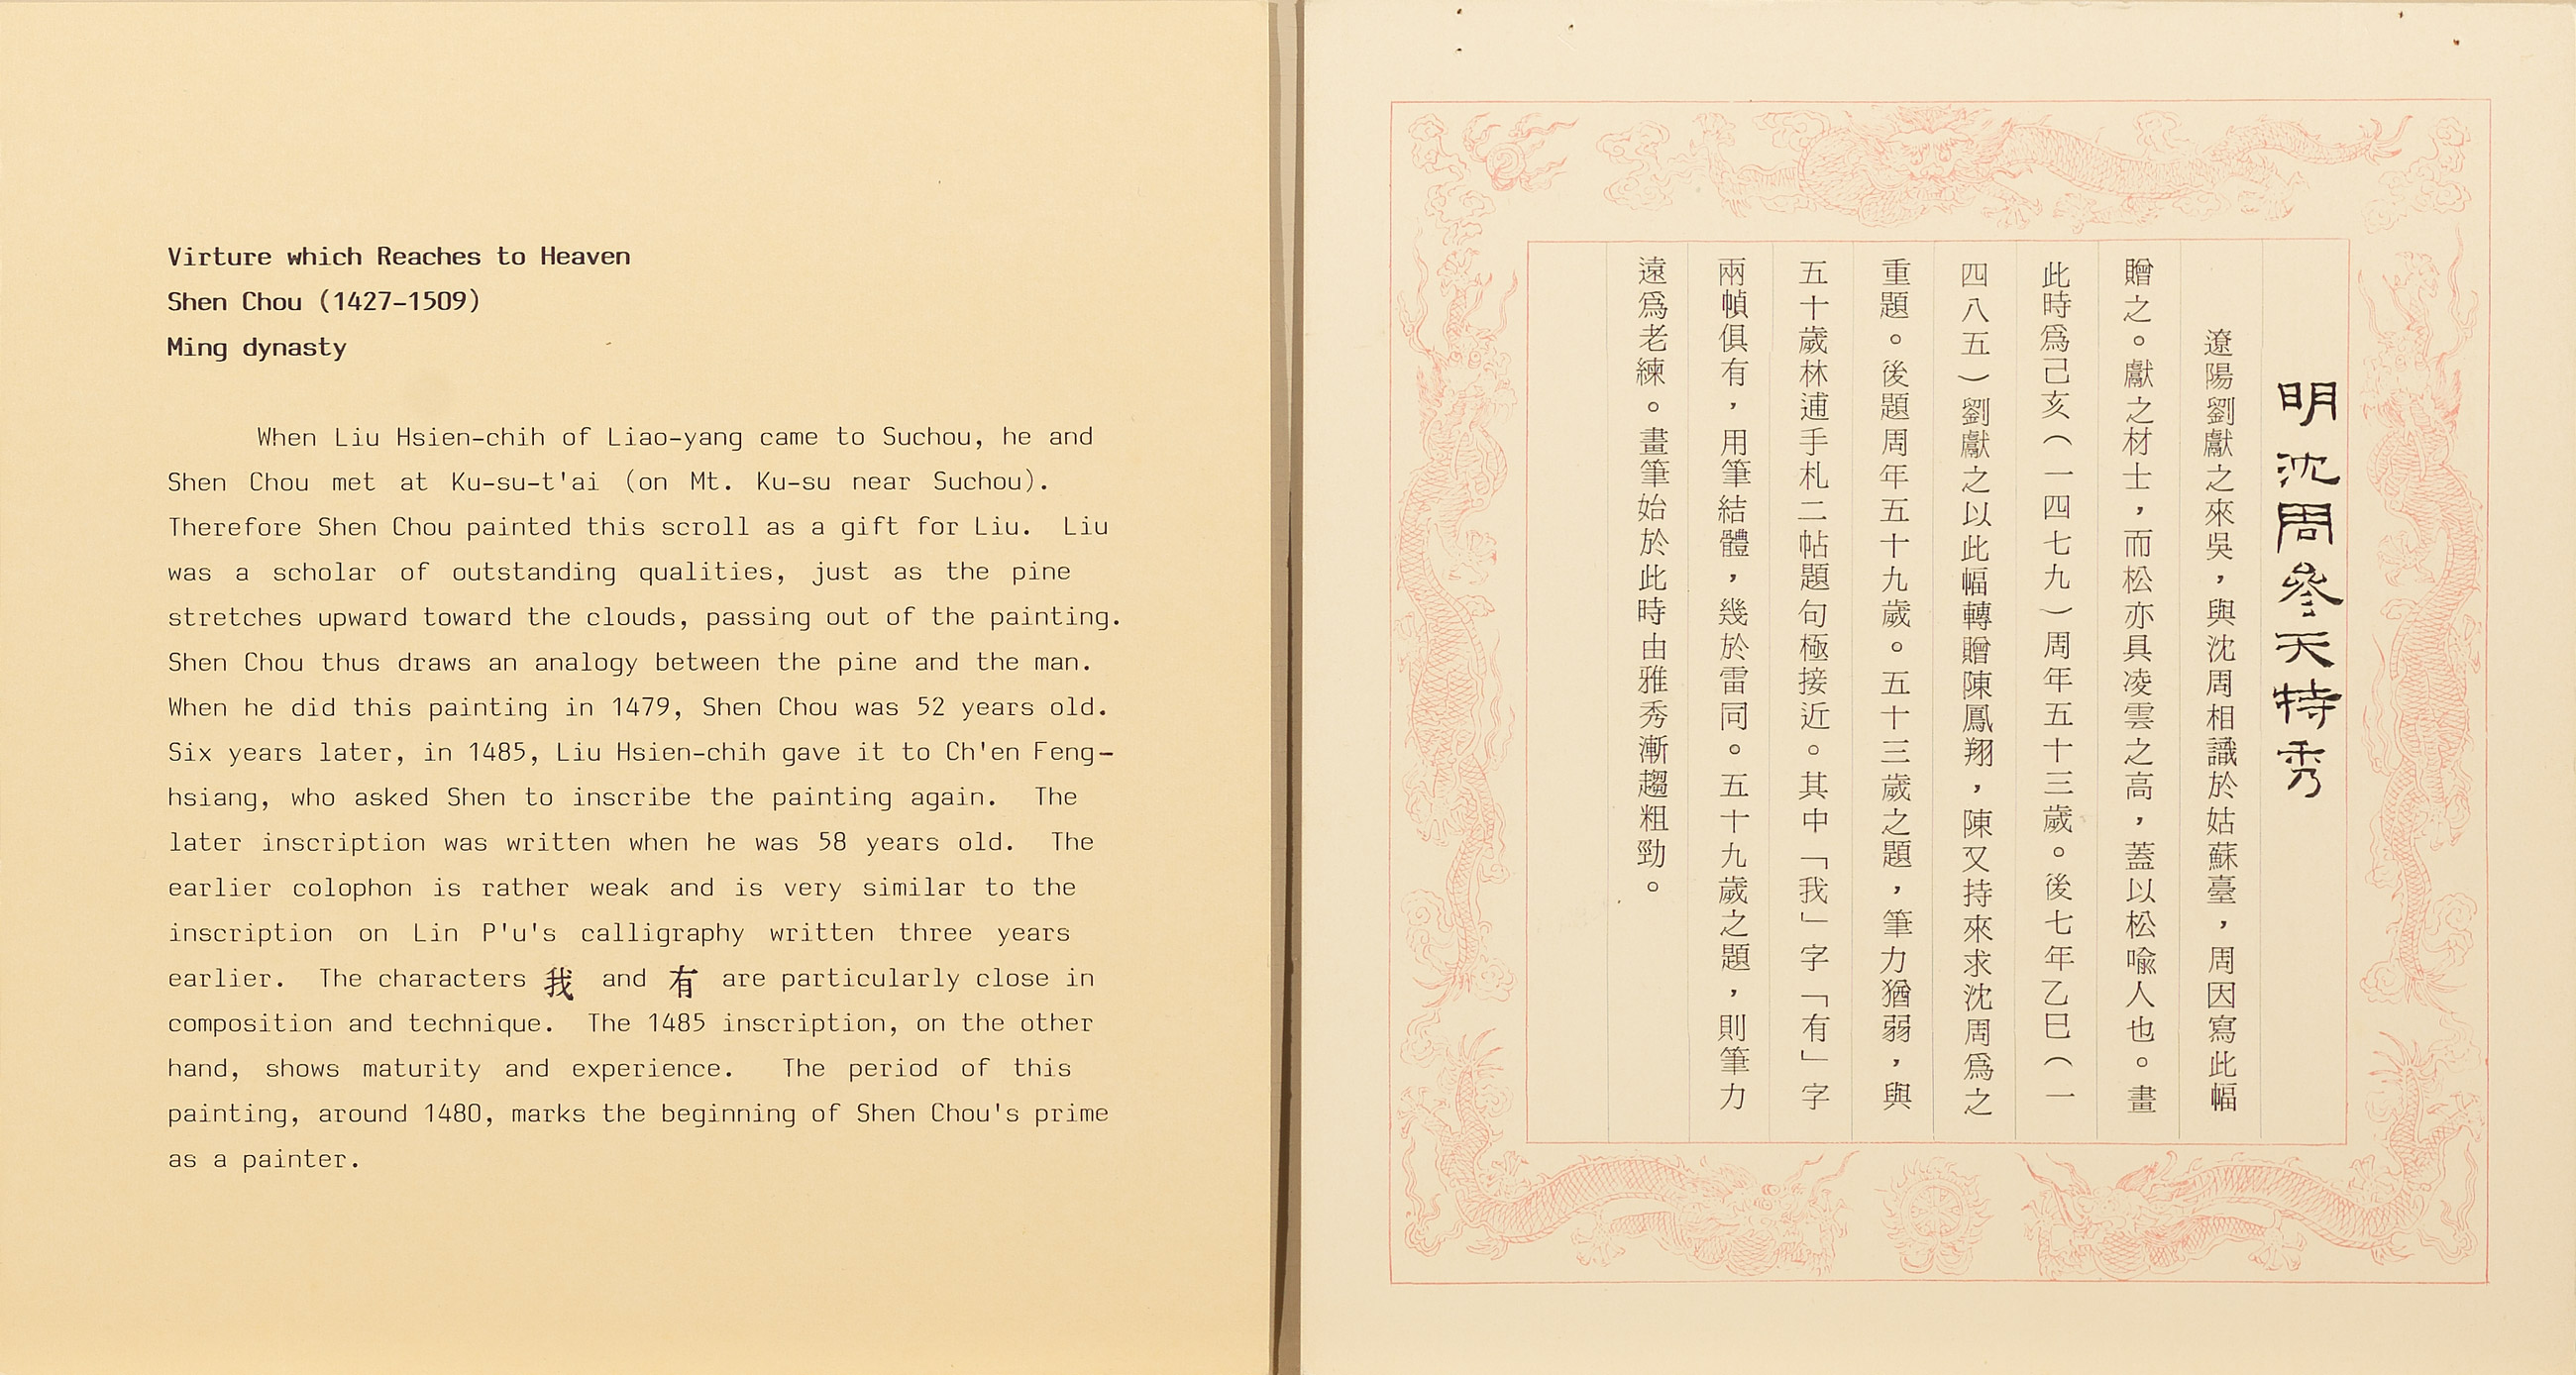 The dragon-border museum label had already begun use in the 1980s, but early versions still were written in brush and ink. Chiang Chao-shen, Wu Ping, and Hsu Kuo-huang all once calligraphed the titles of these cards.